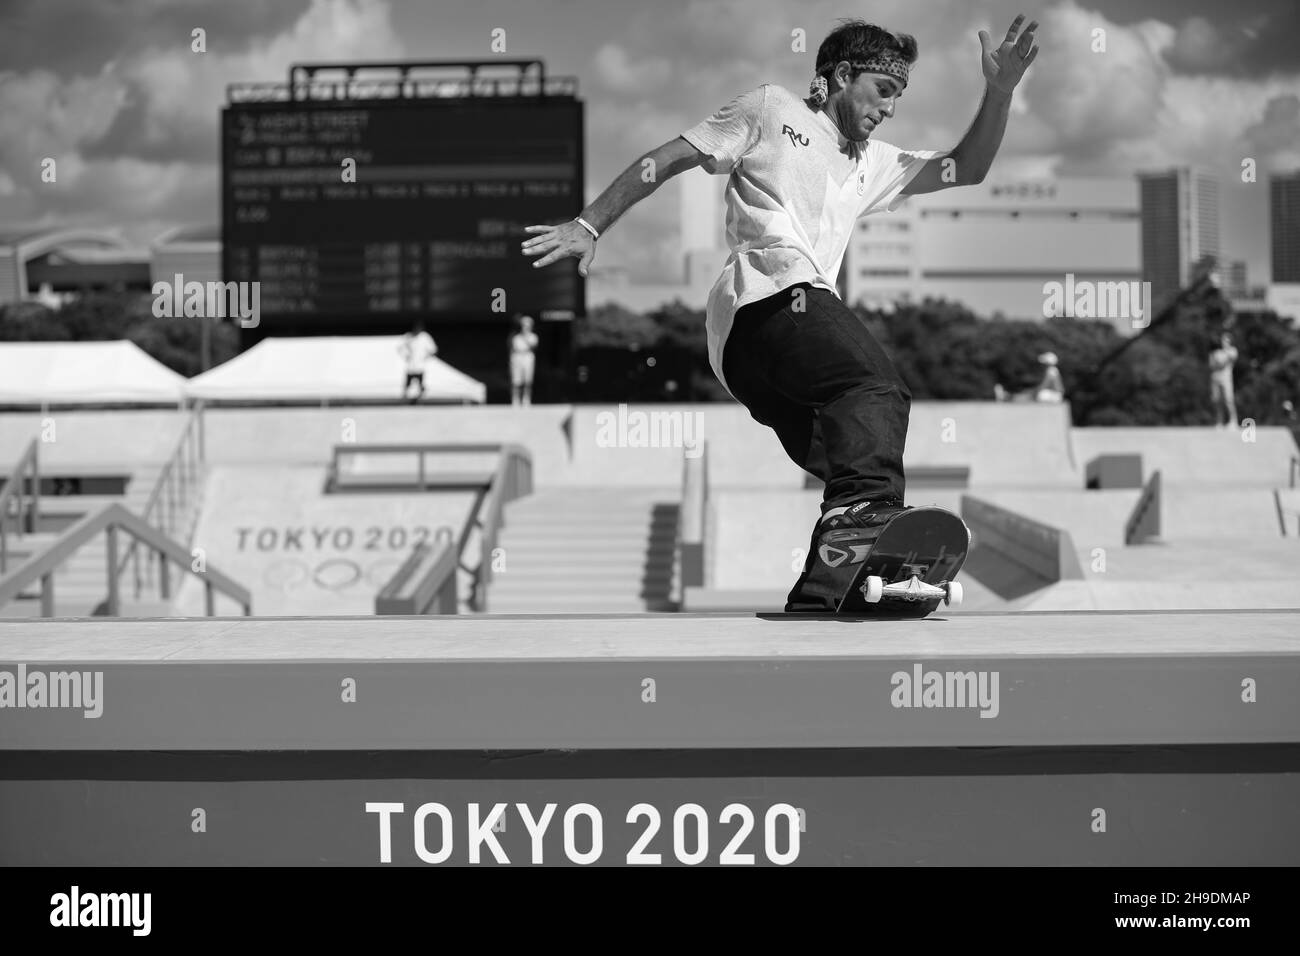 JULY 25th, 2021 - TOKYO, JAPAN: Micky PAPA of Canada in action during Heat 1 of the Skateboarding Men's Street Prelims at the Ariake Urban Sports Park Stock Photo